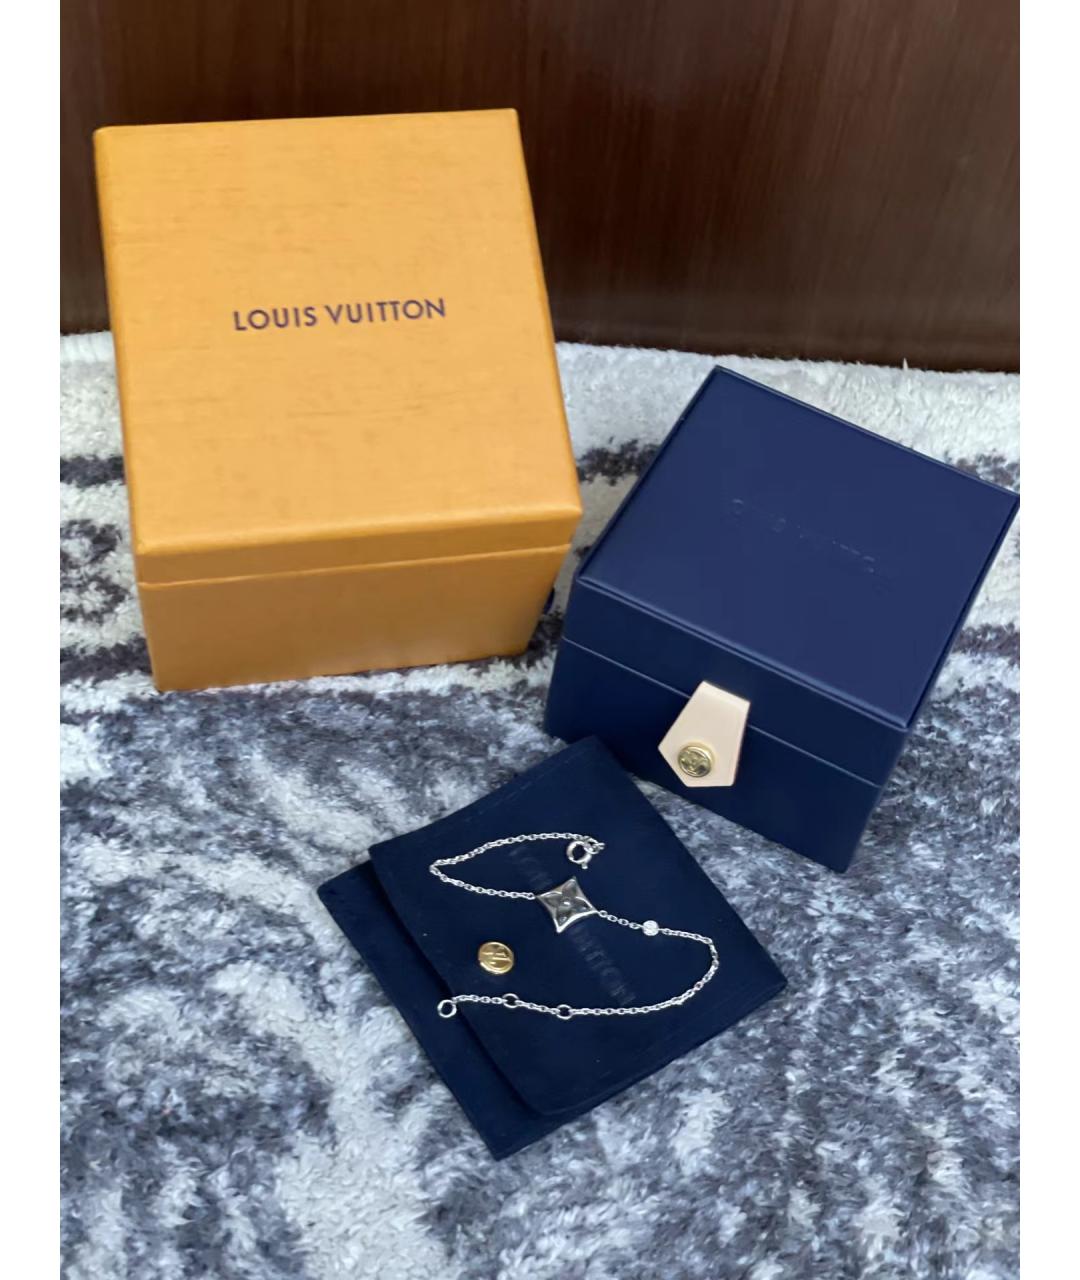 LOUIS VUITTON PRE-OWNED Браслет, фото 2